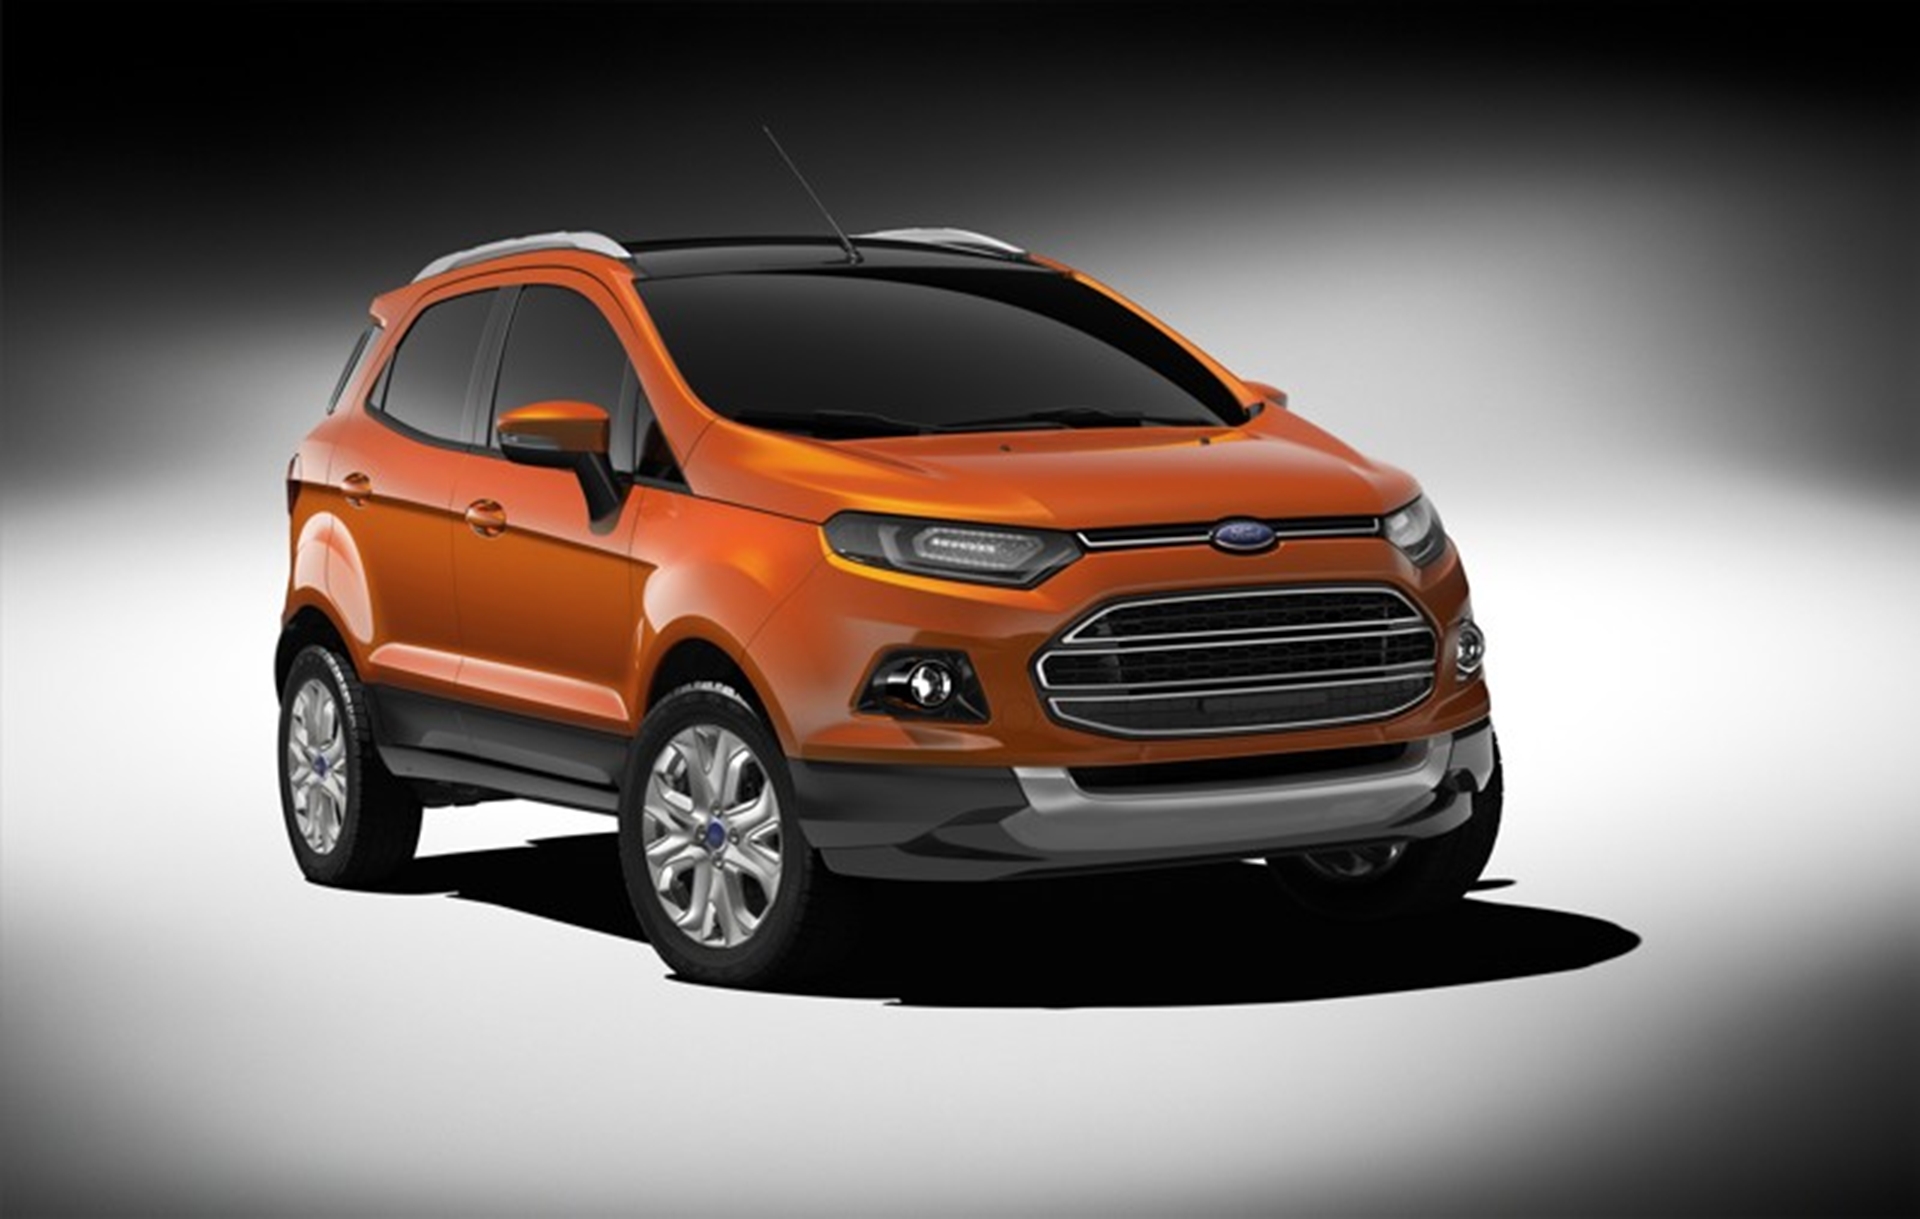 Delhi Auto Expo: Capable, Contemporary and Compact – the All-New Ford EcoSport is a Fun, Friendly SUV